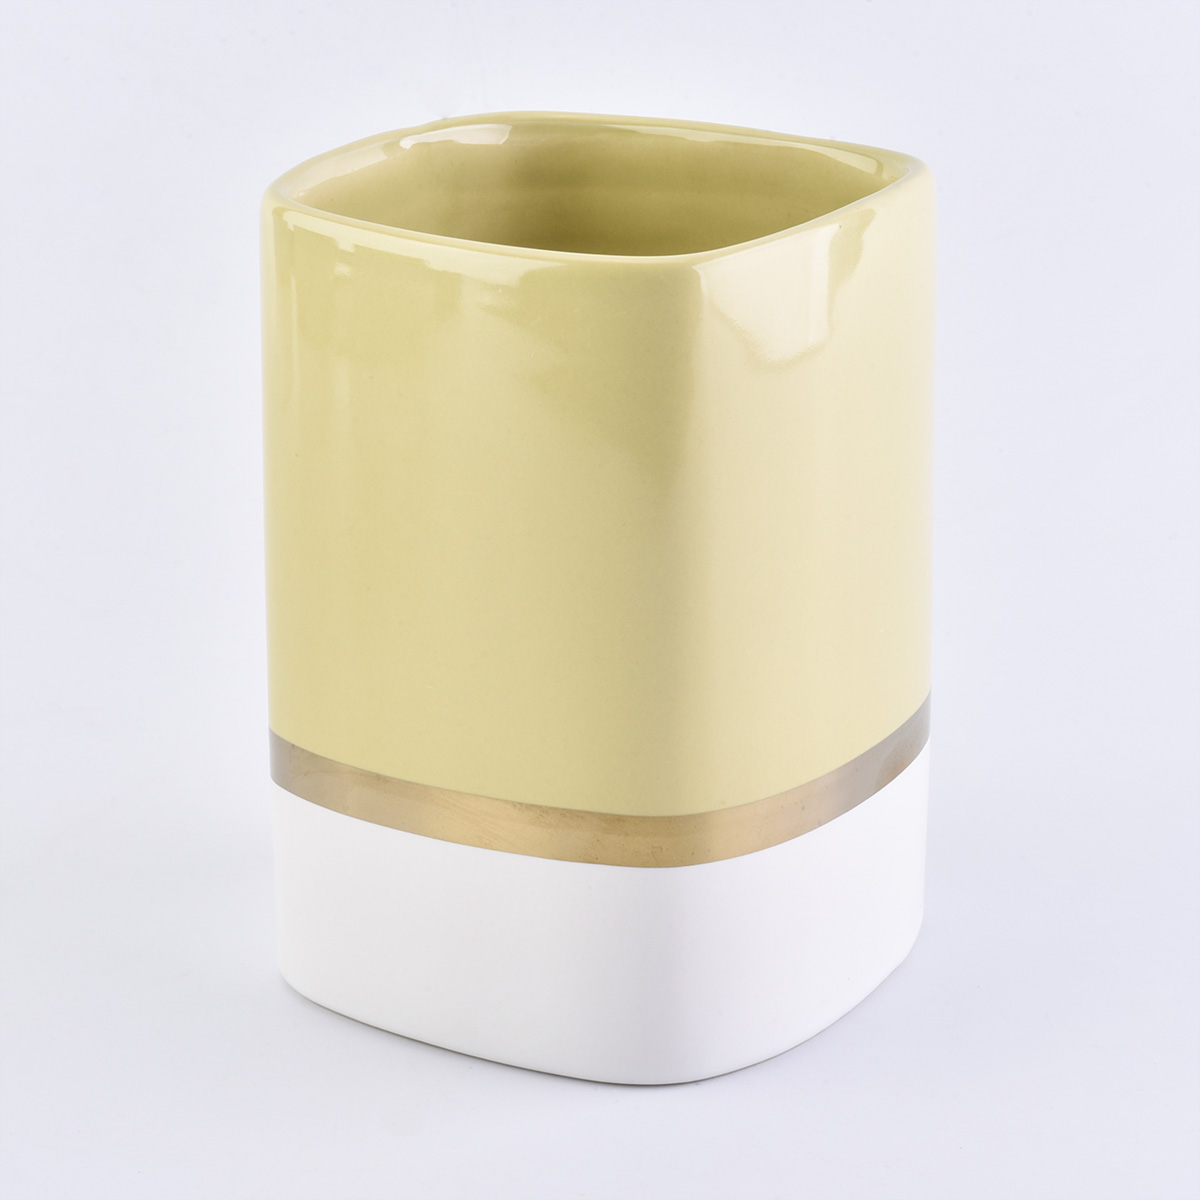 Square Shaped Ceramic Jars For Candle Making